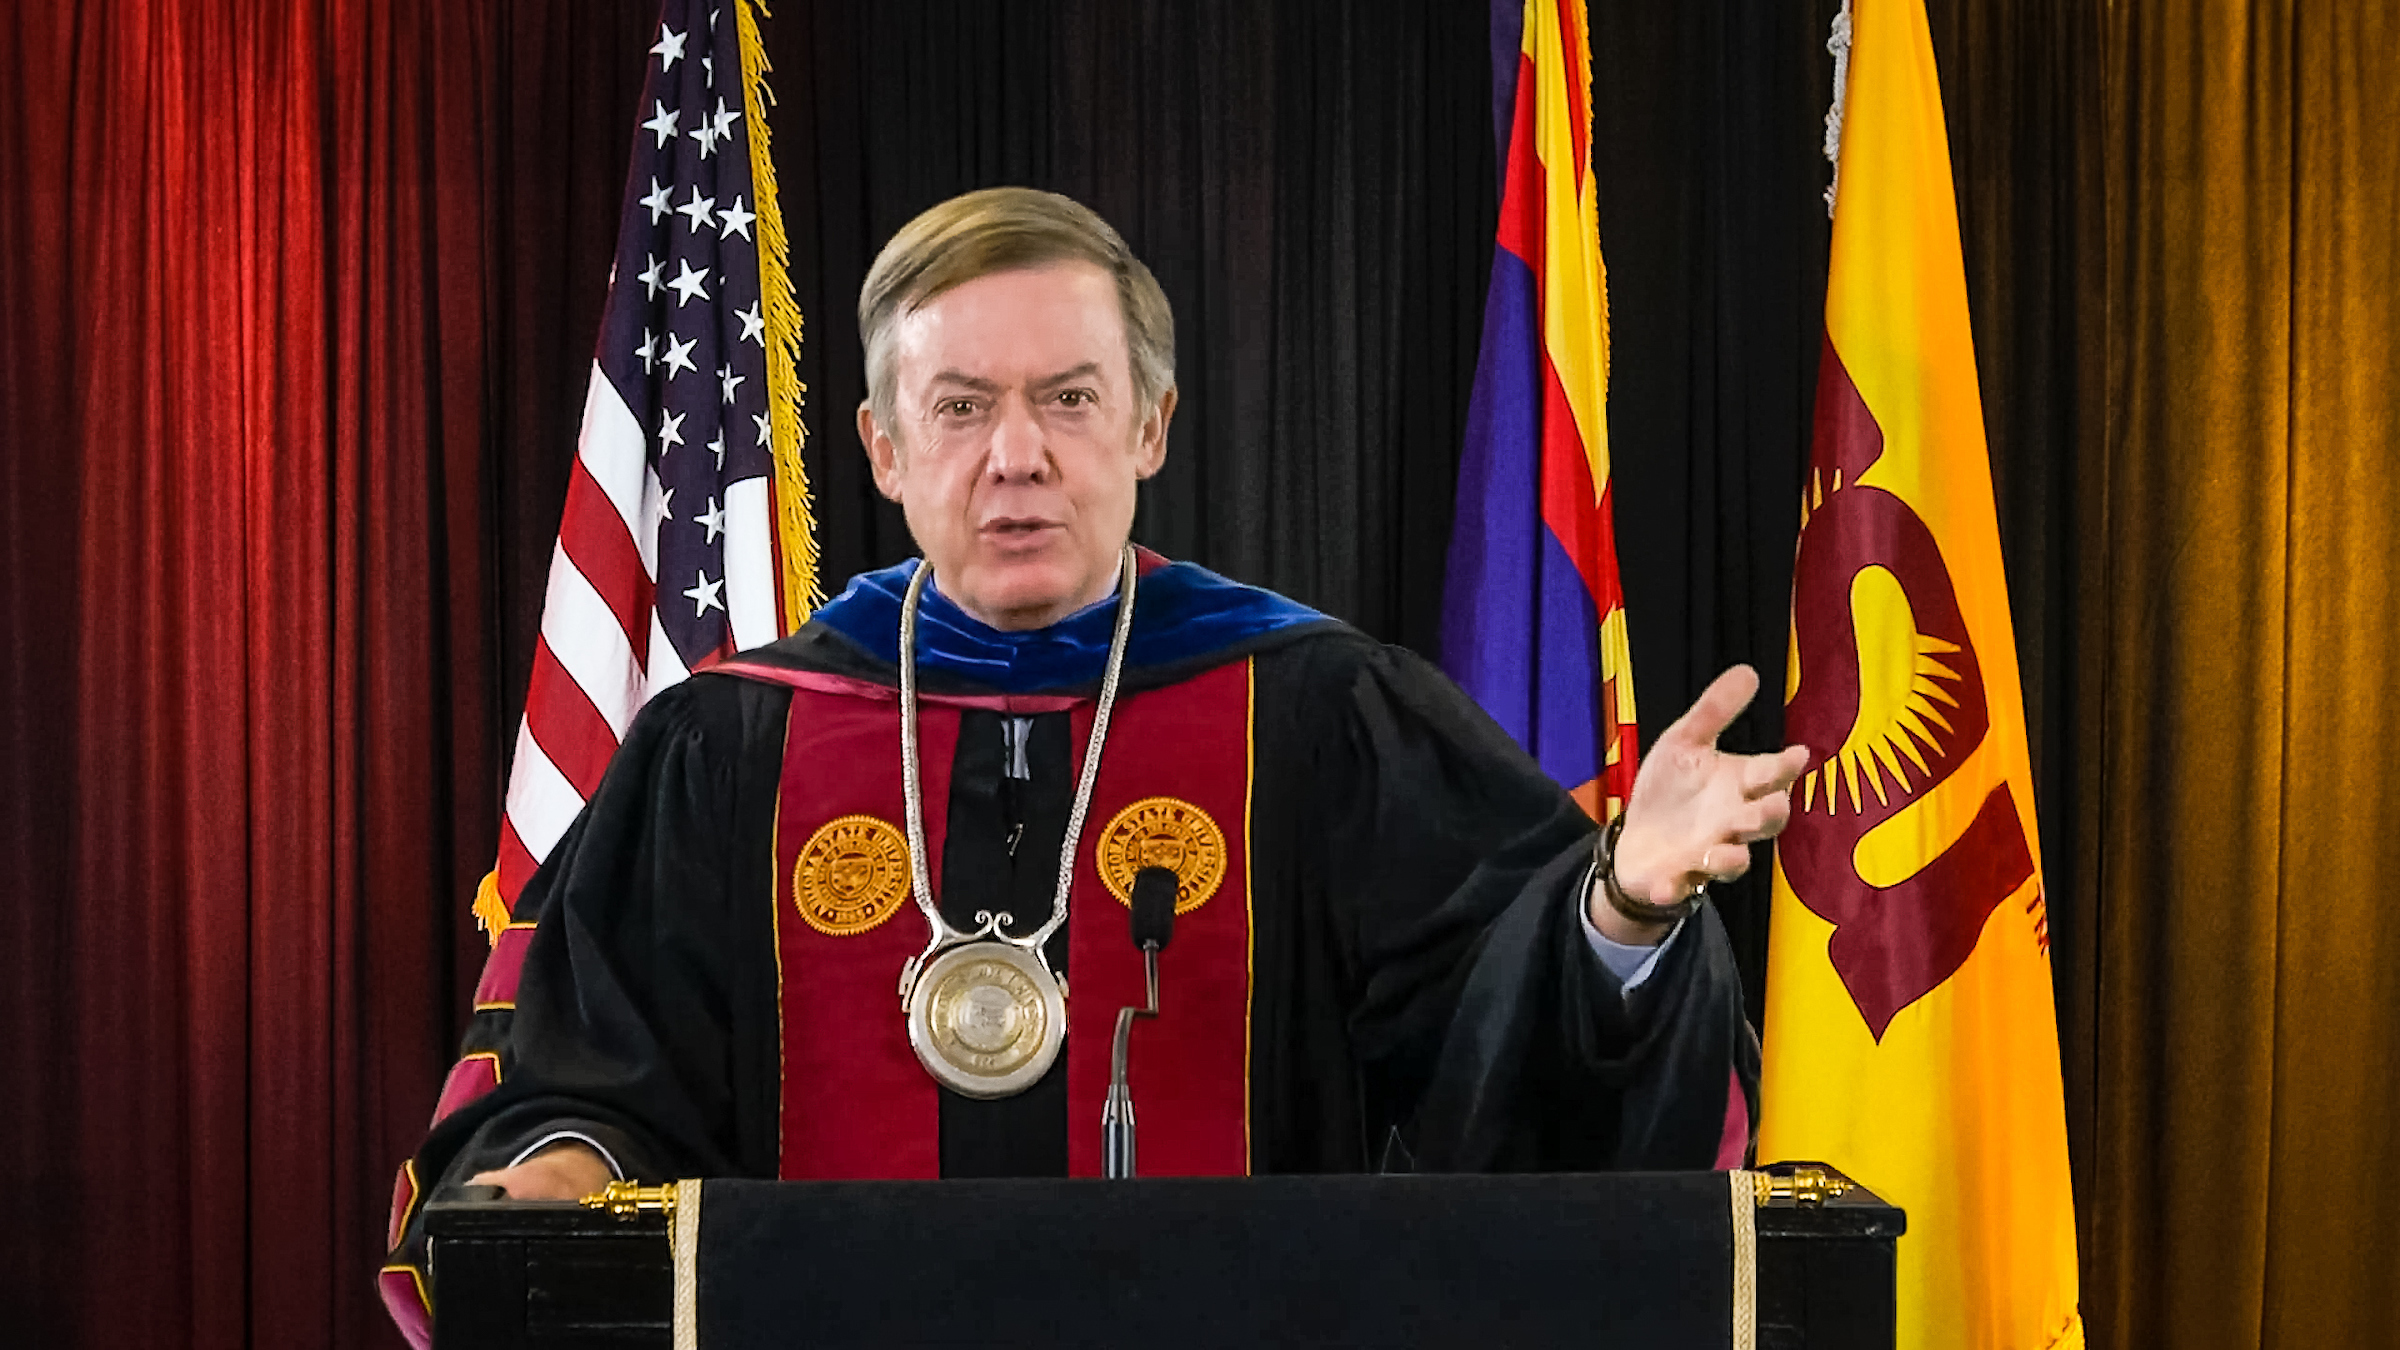 ASU's Fall 2020 graduates urged to write the charter of their own